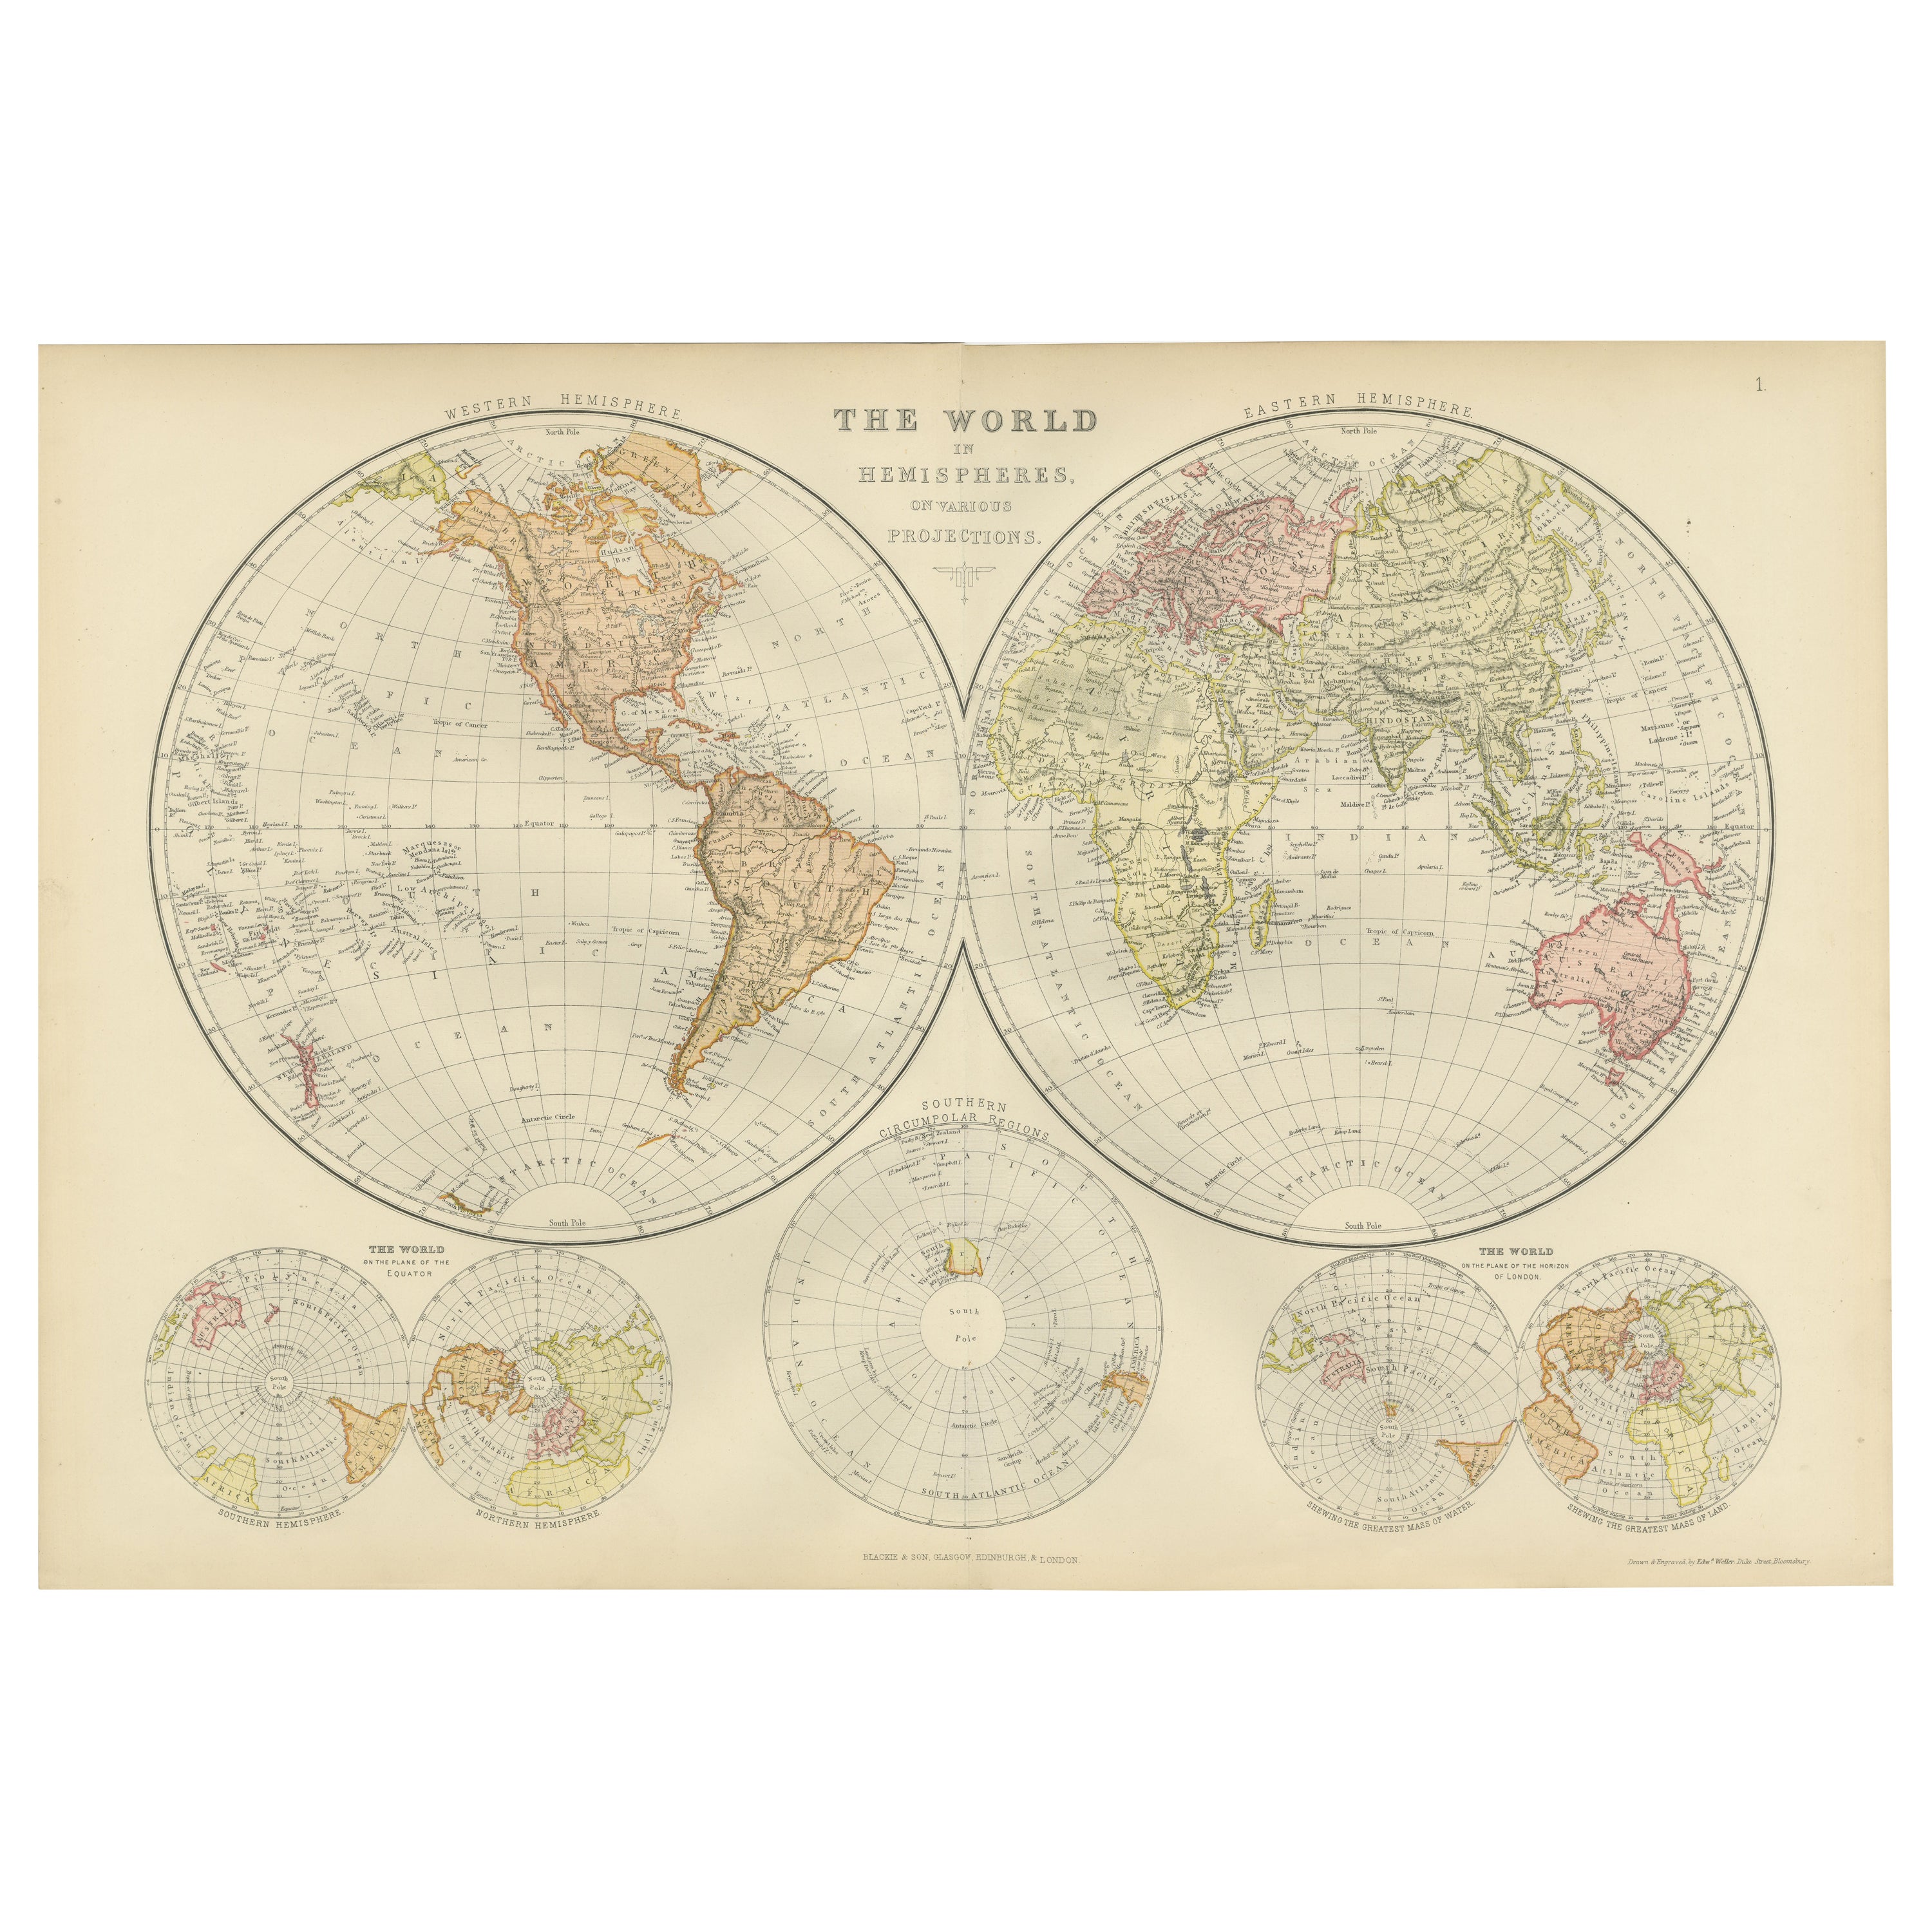 Antique Map of The World in Hemispheres on Various Projections, 1882